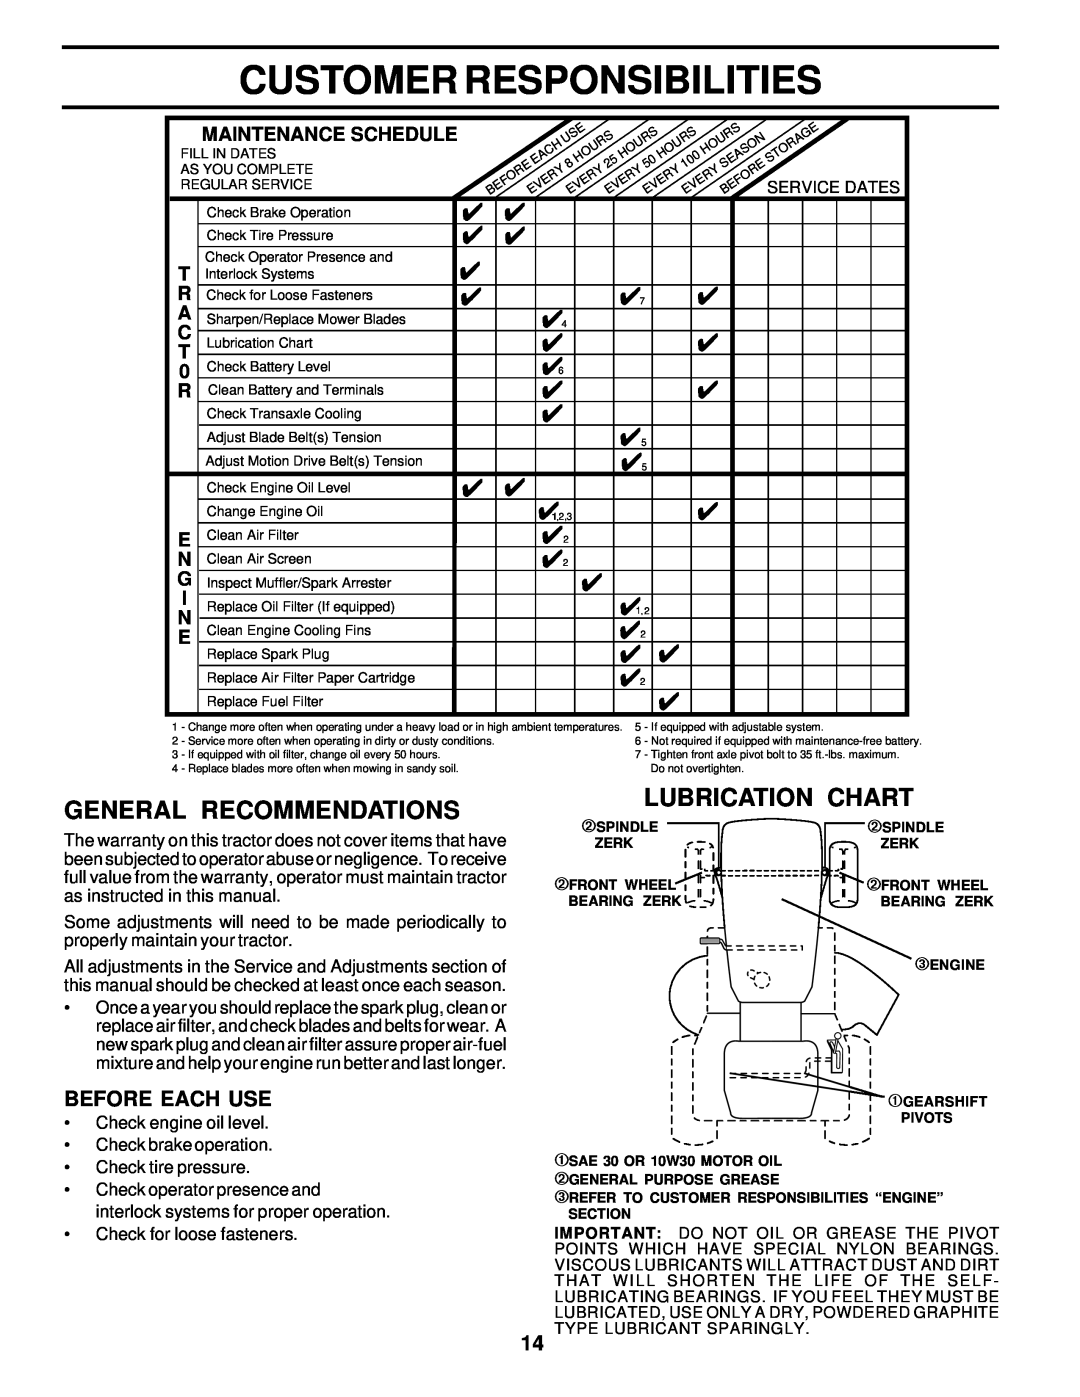 Poulan PR18542STC owner manual Customer Responsibilities, General Recommendations, Lubrication Chart, Before Each Use 